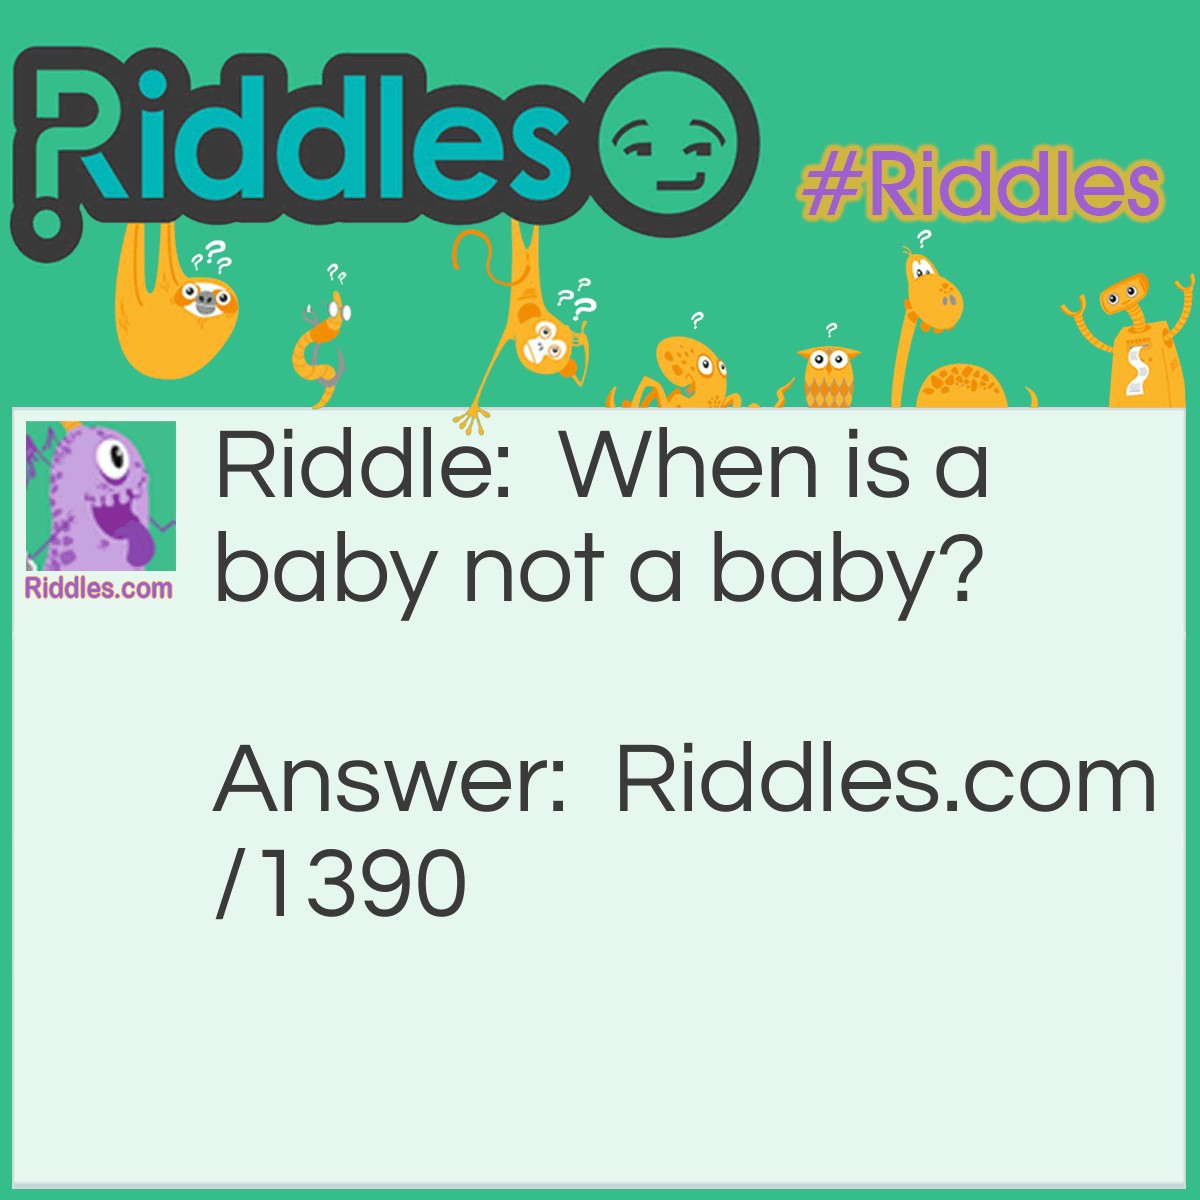 Riddle: When is a baby not a baby? Answer: When it's a little cross.